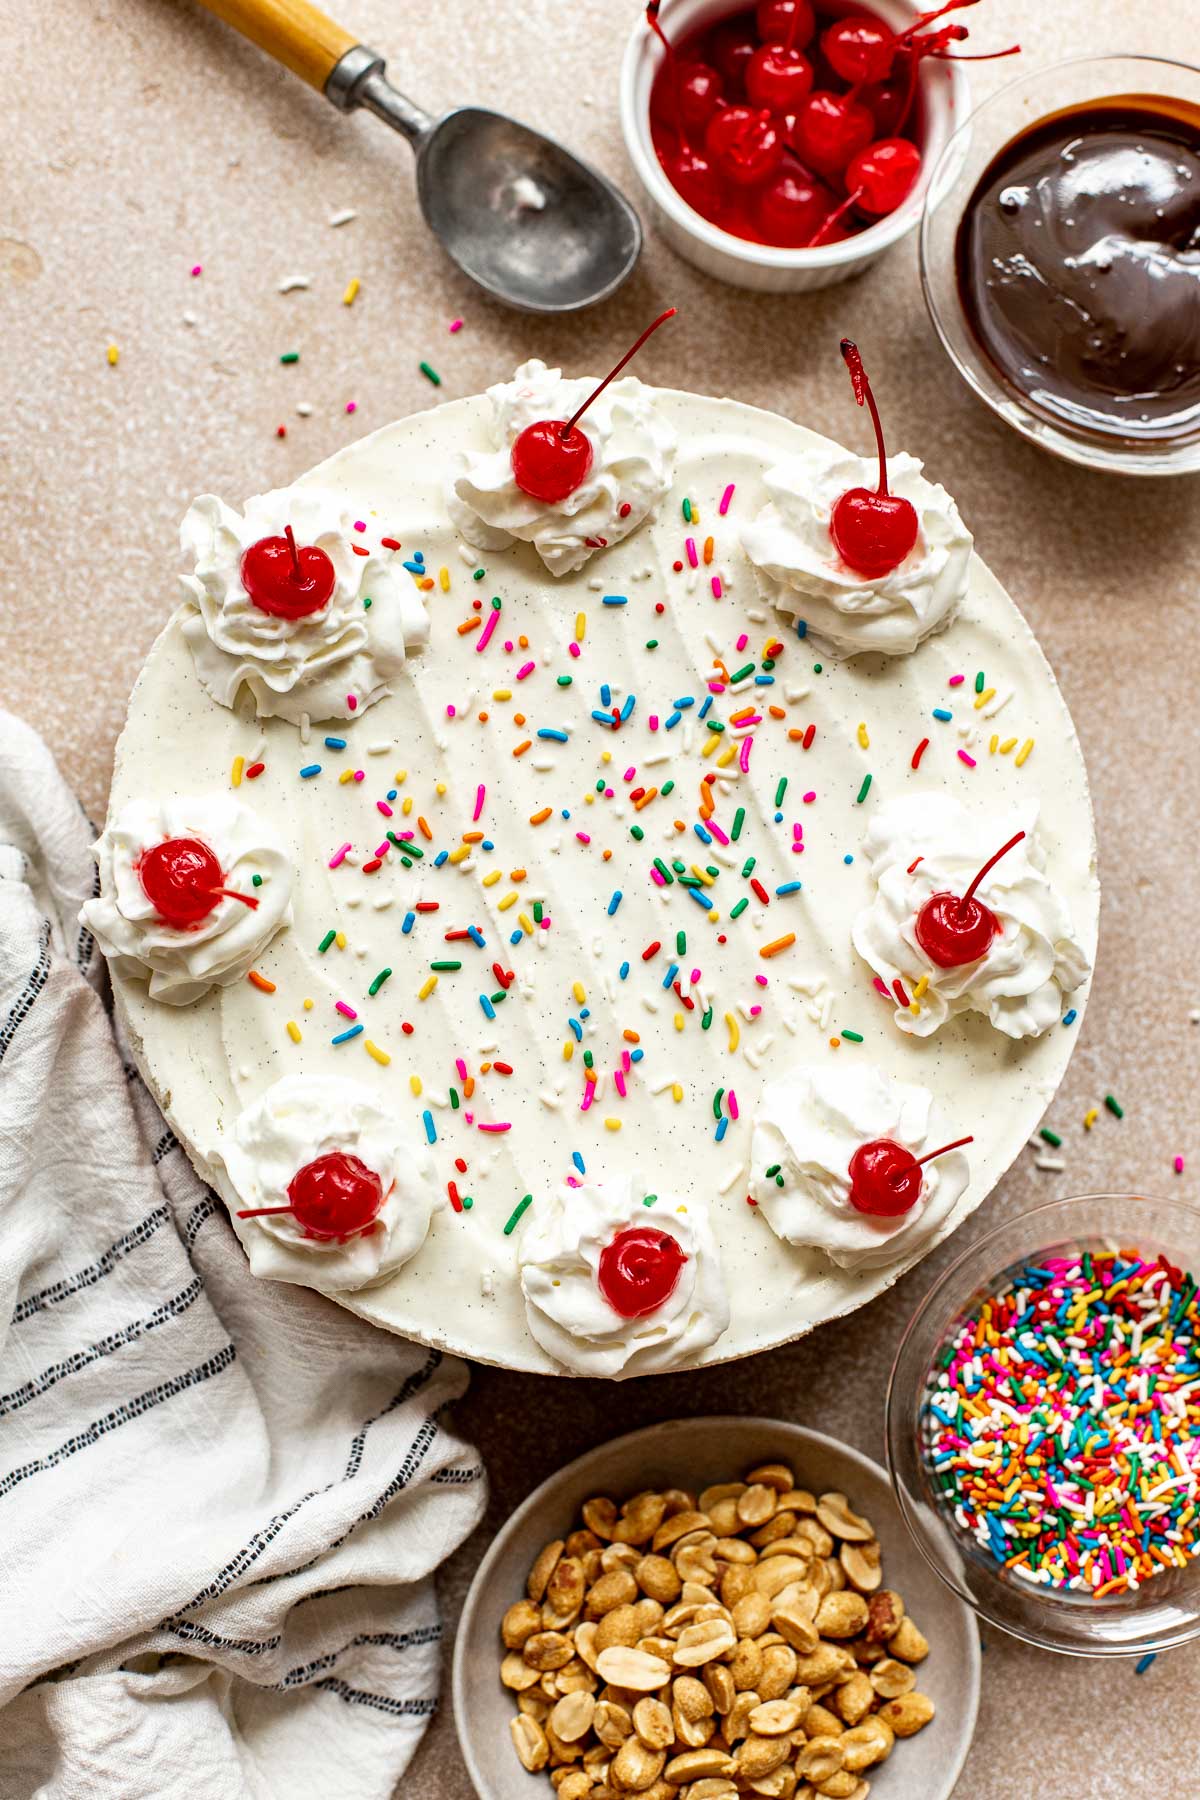 a photos of an ice cream cake decorated with cherries and rainbow sprinkles.